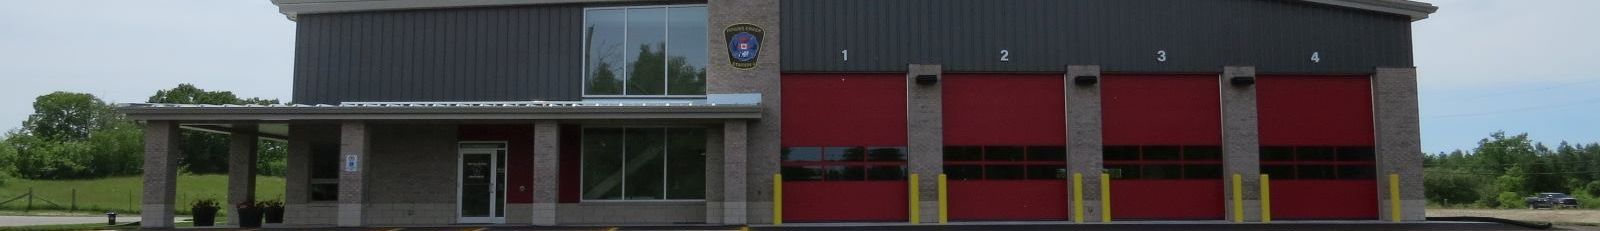 Picture of Nogies Creek Fire Station in Trent Lakes.